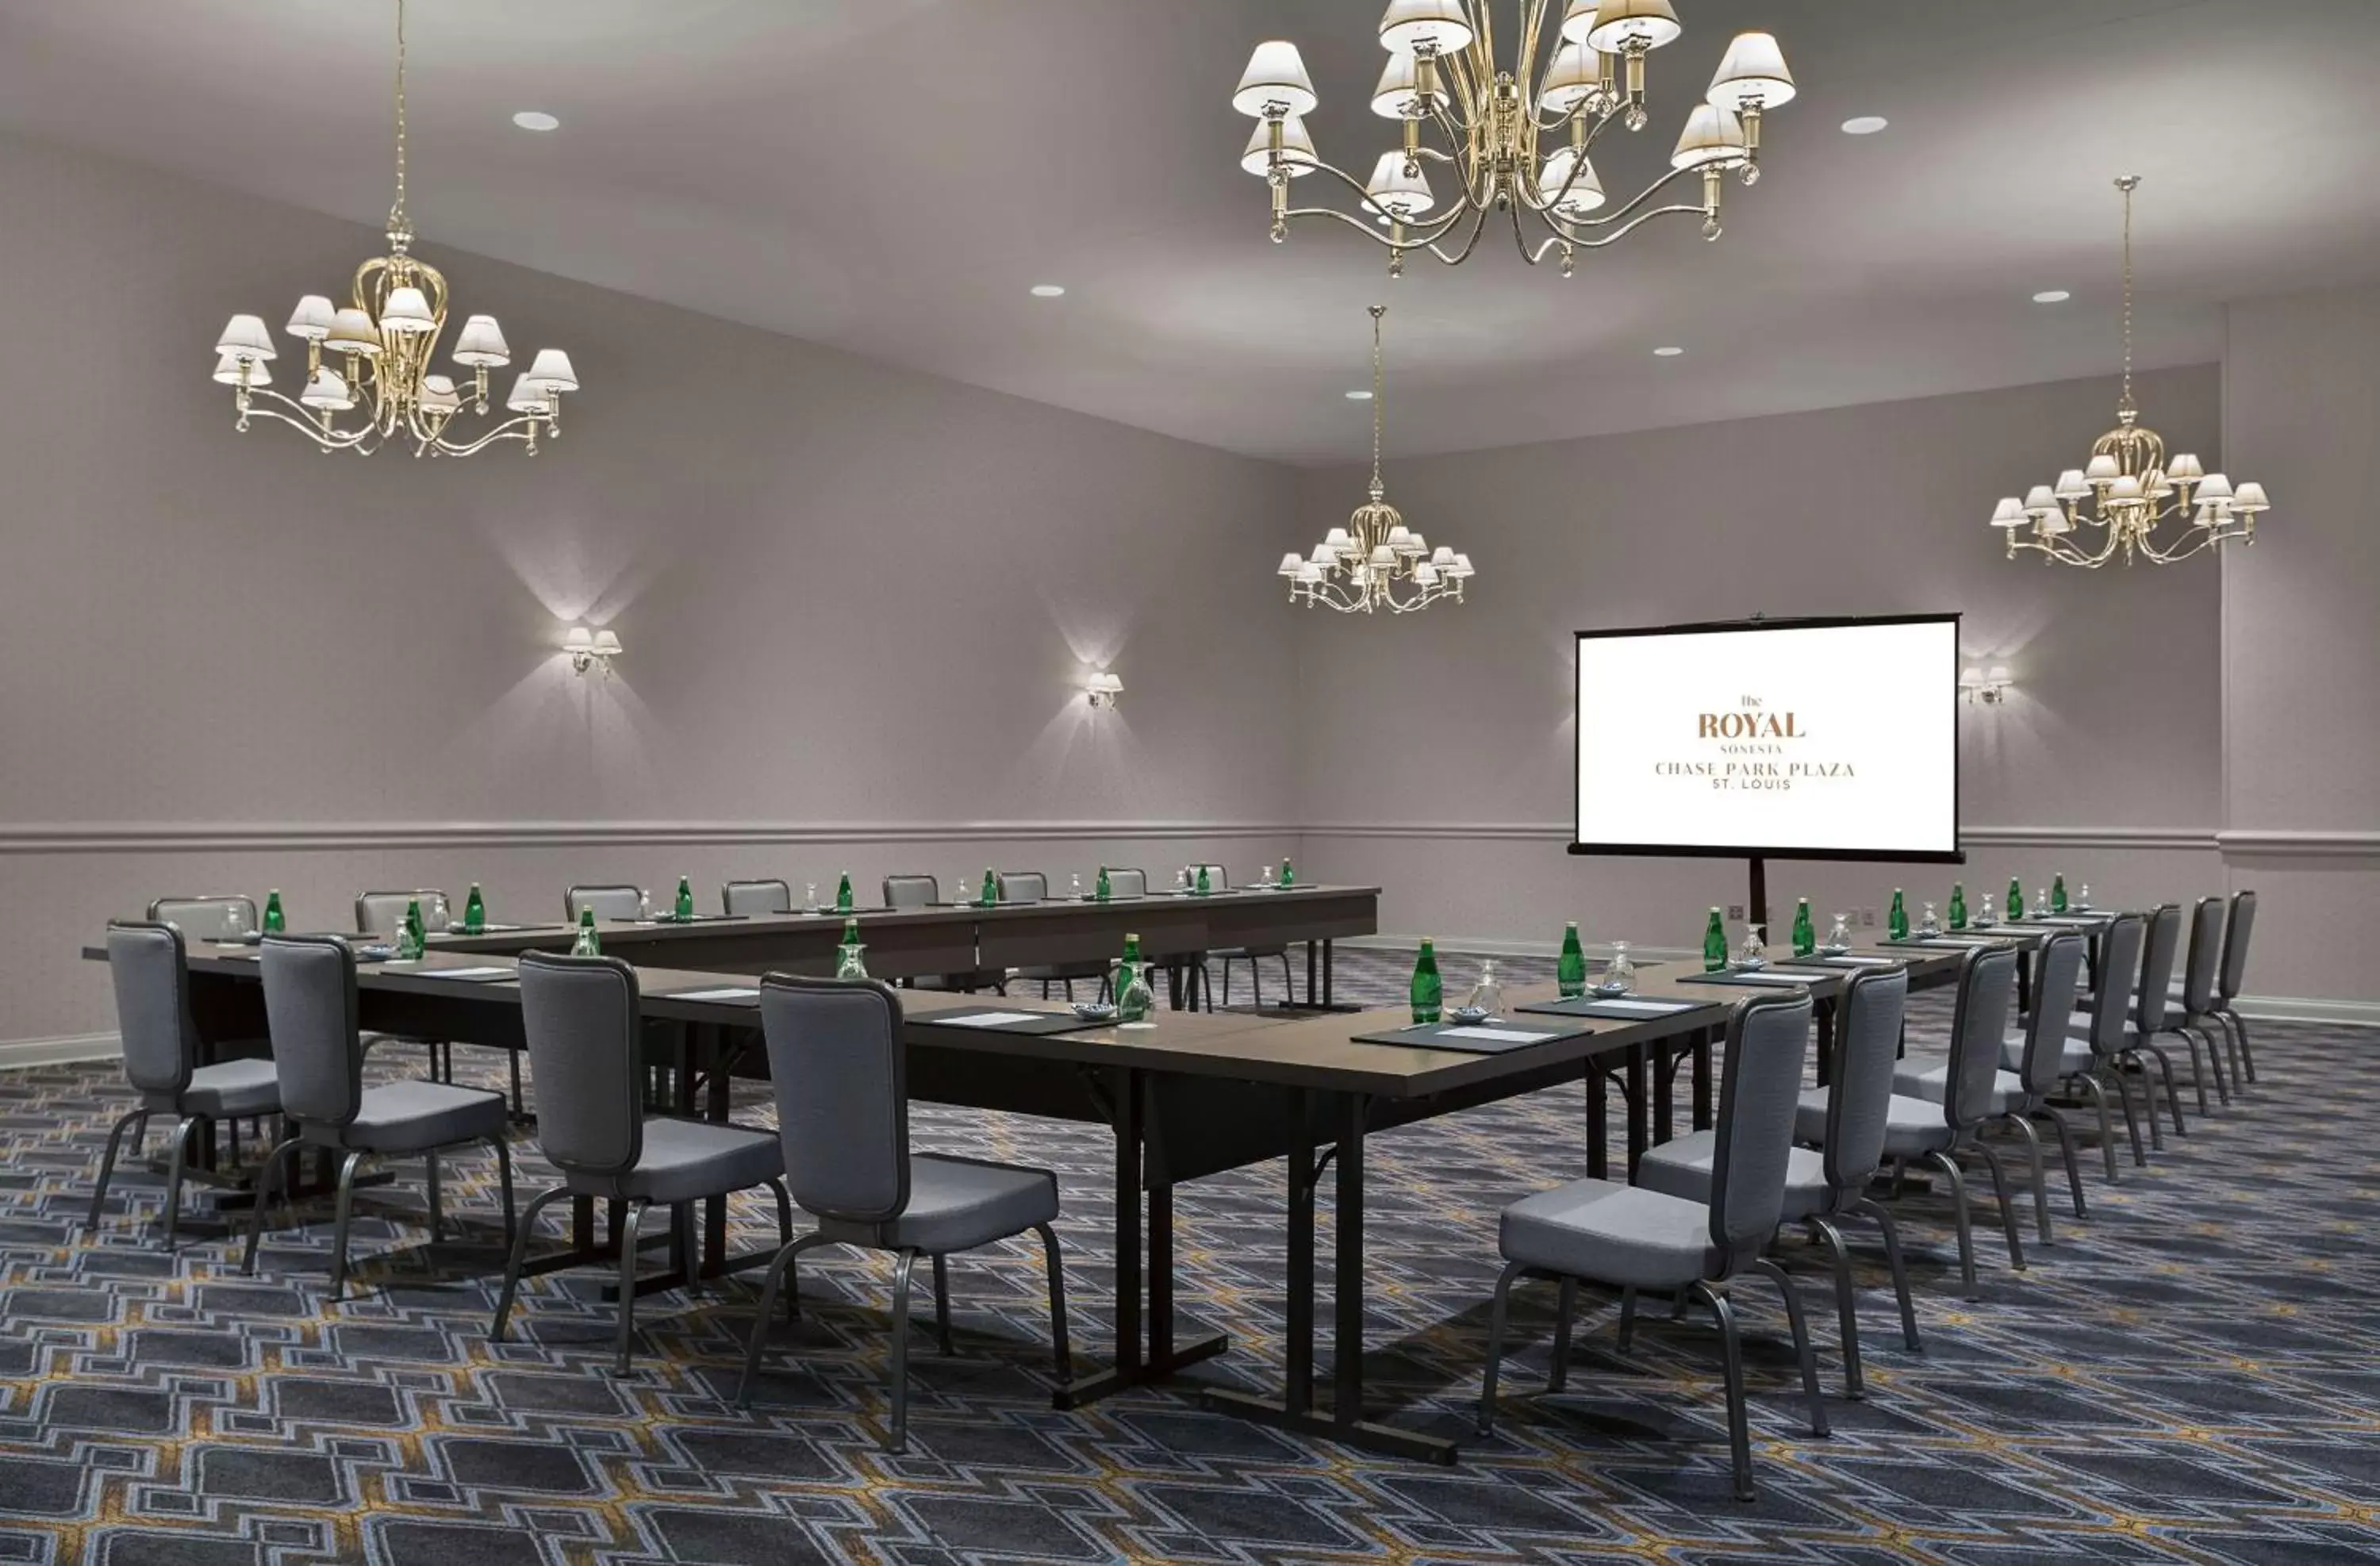 Meeting/conference room in The Royal Sonesta Chase Park Plaza St Louis